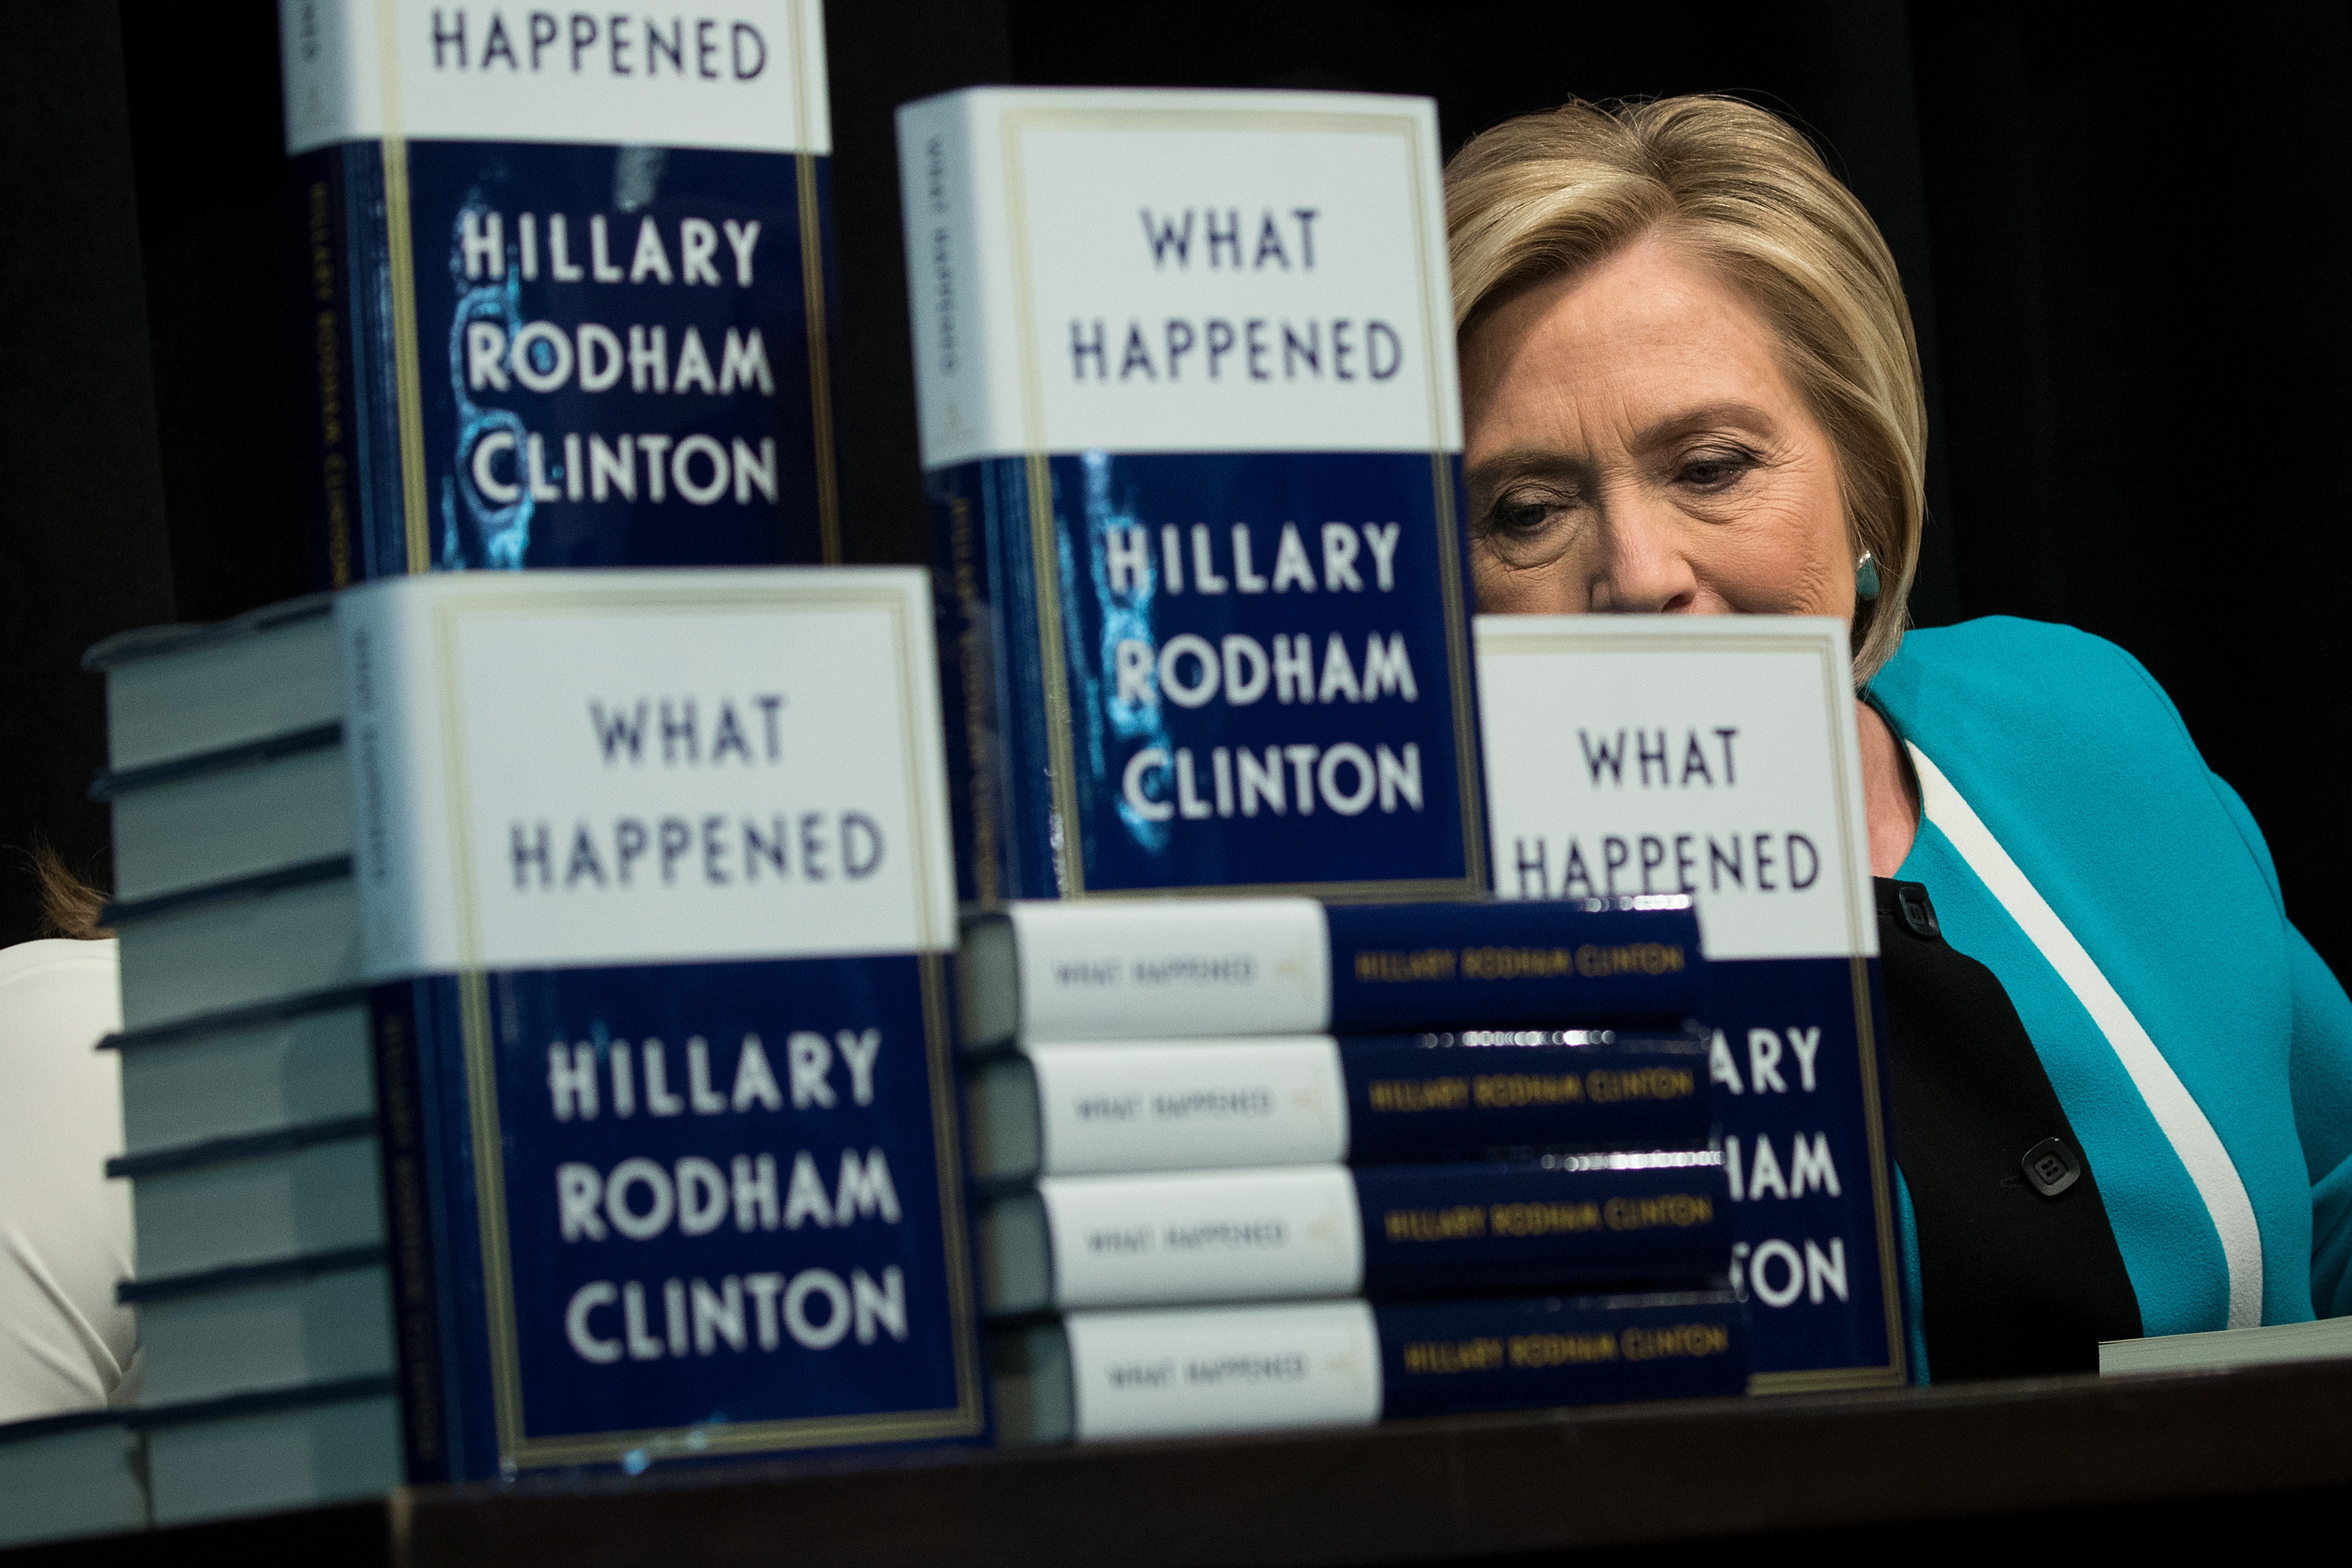 what happened by hillary rodham clinton